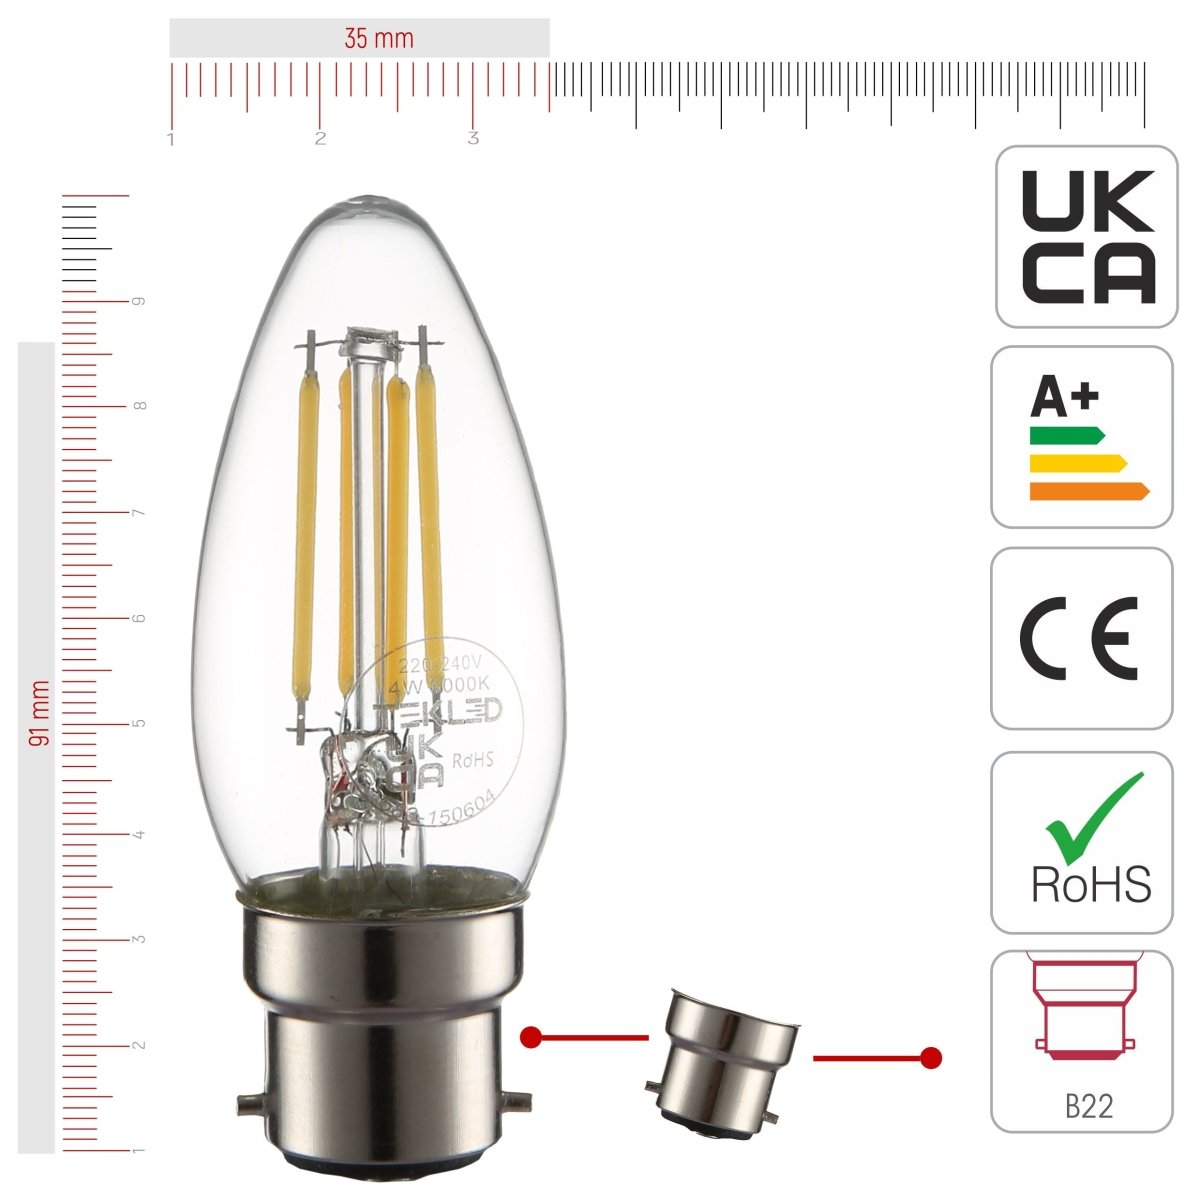 Size and certifications of LED Filament Bulb C35 Candle B22 Bayonet Cap 4W 470lm Cool White 4000K Clear Pack of 6 | TEKLED 583-150604